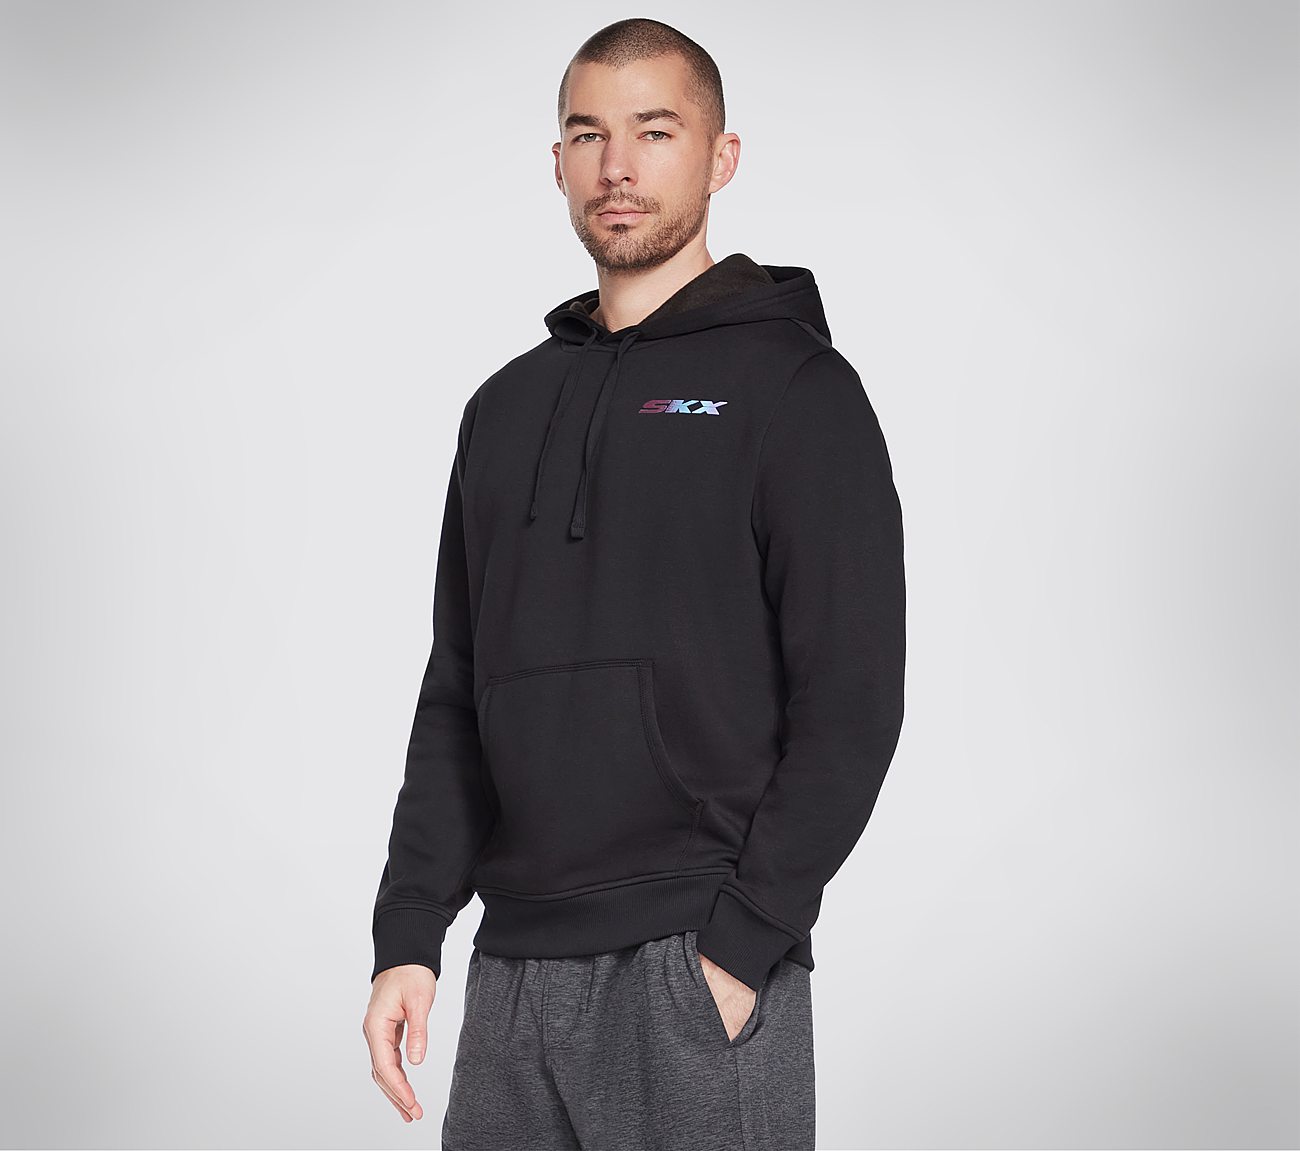 SKX VANTAGE PULLOVER, BBBBLACK Apparels Lateral View